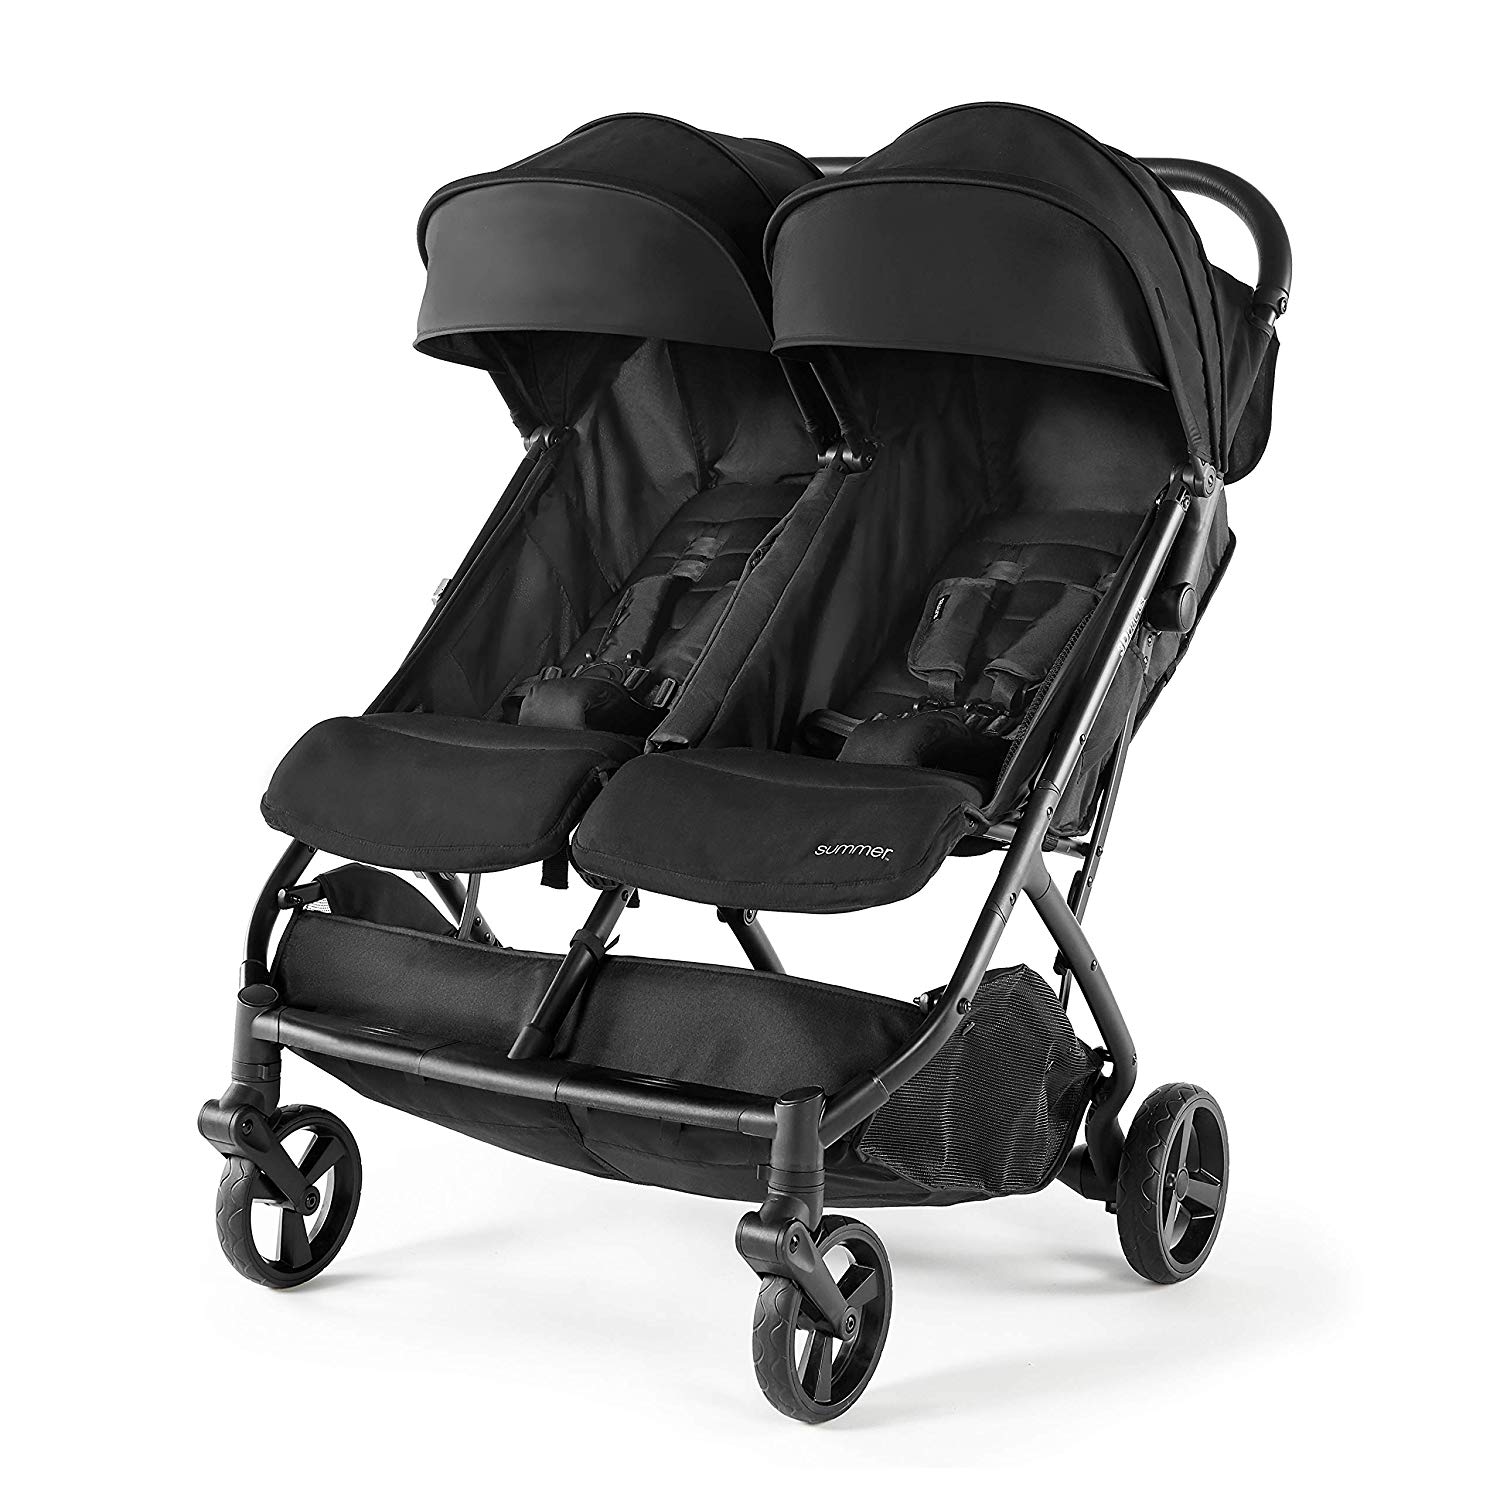 compact side by side stroller